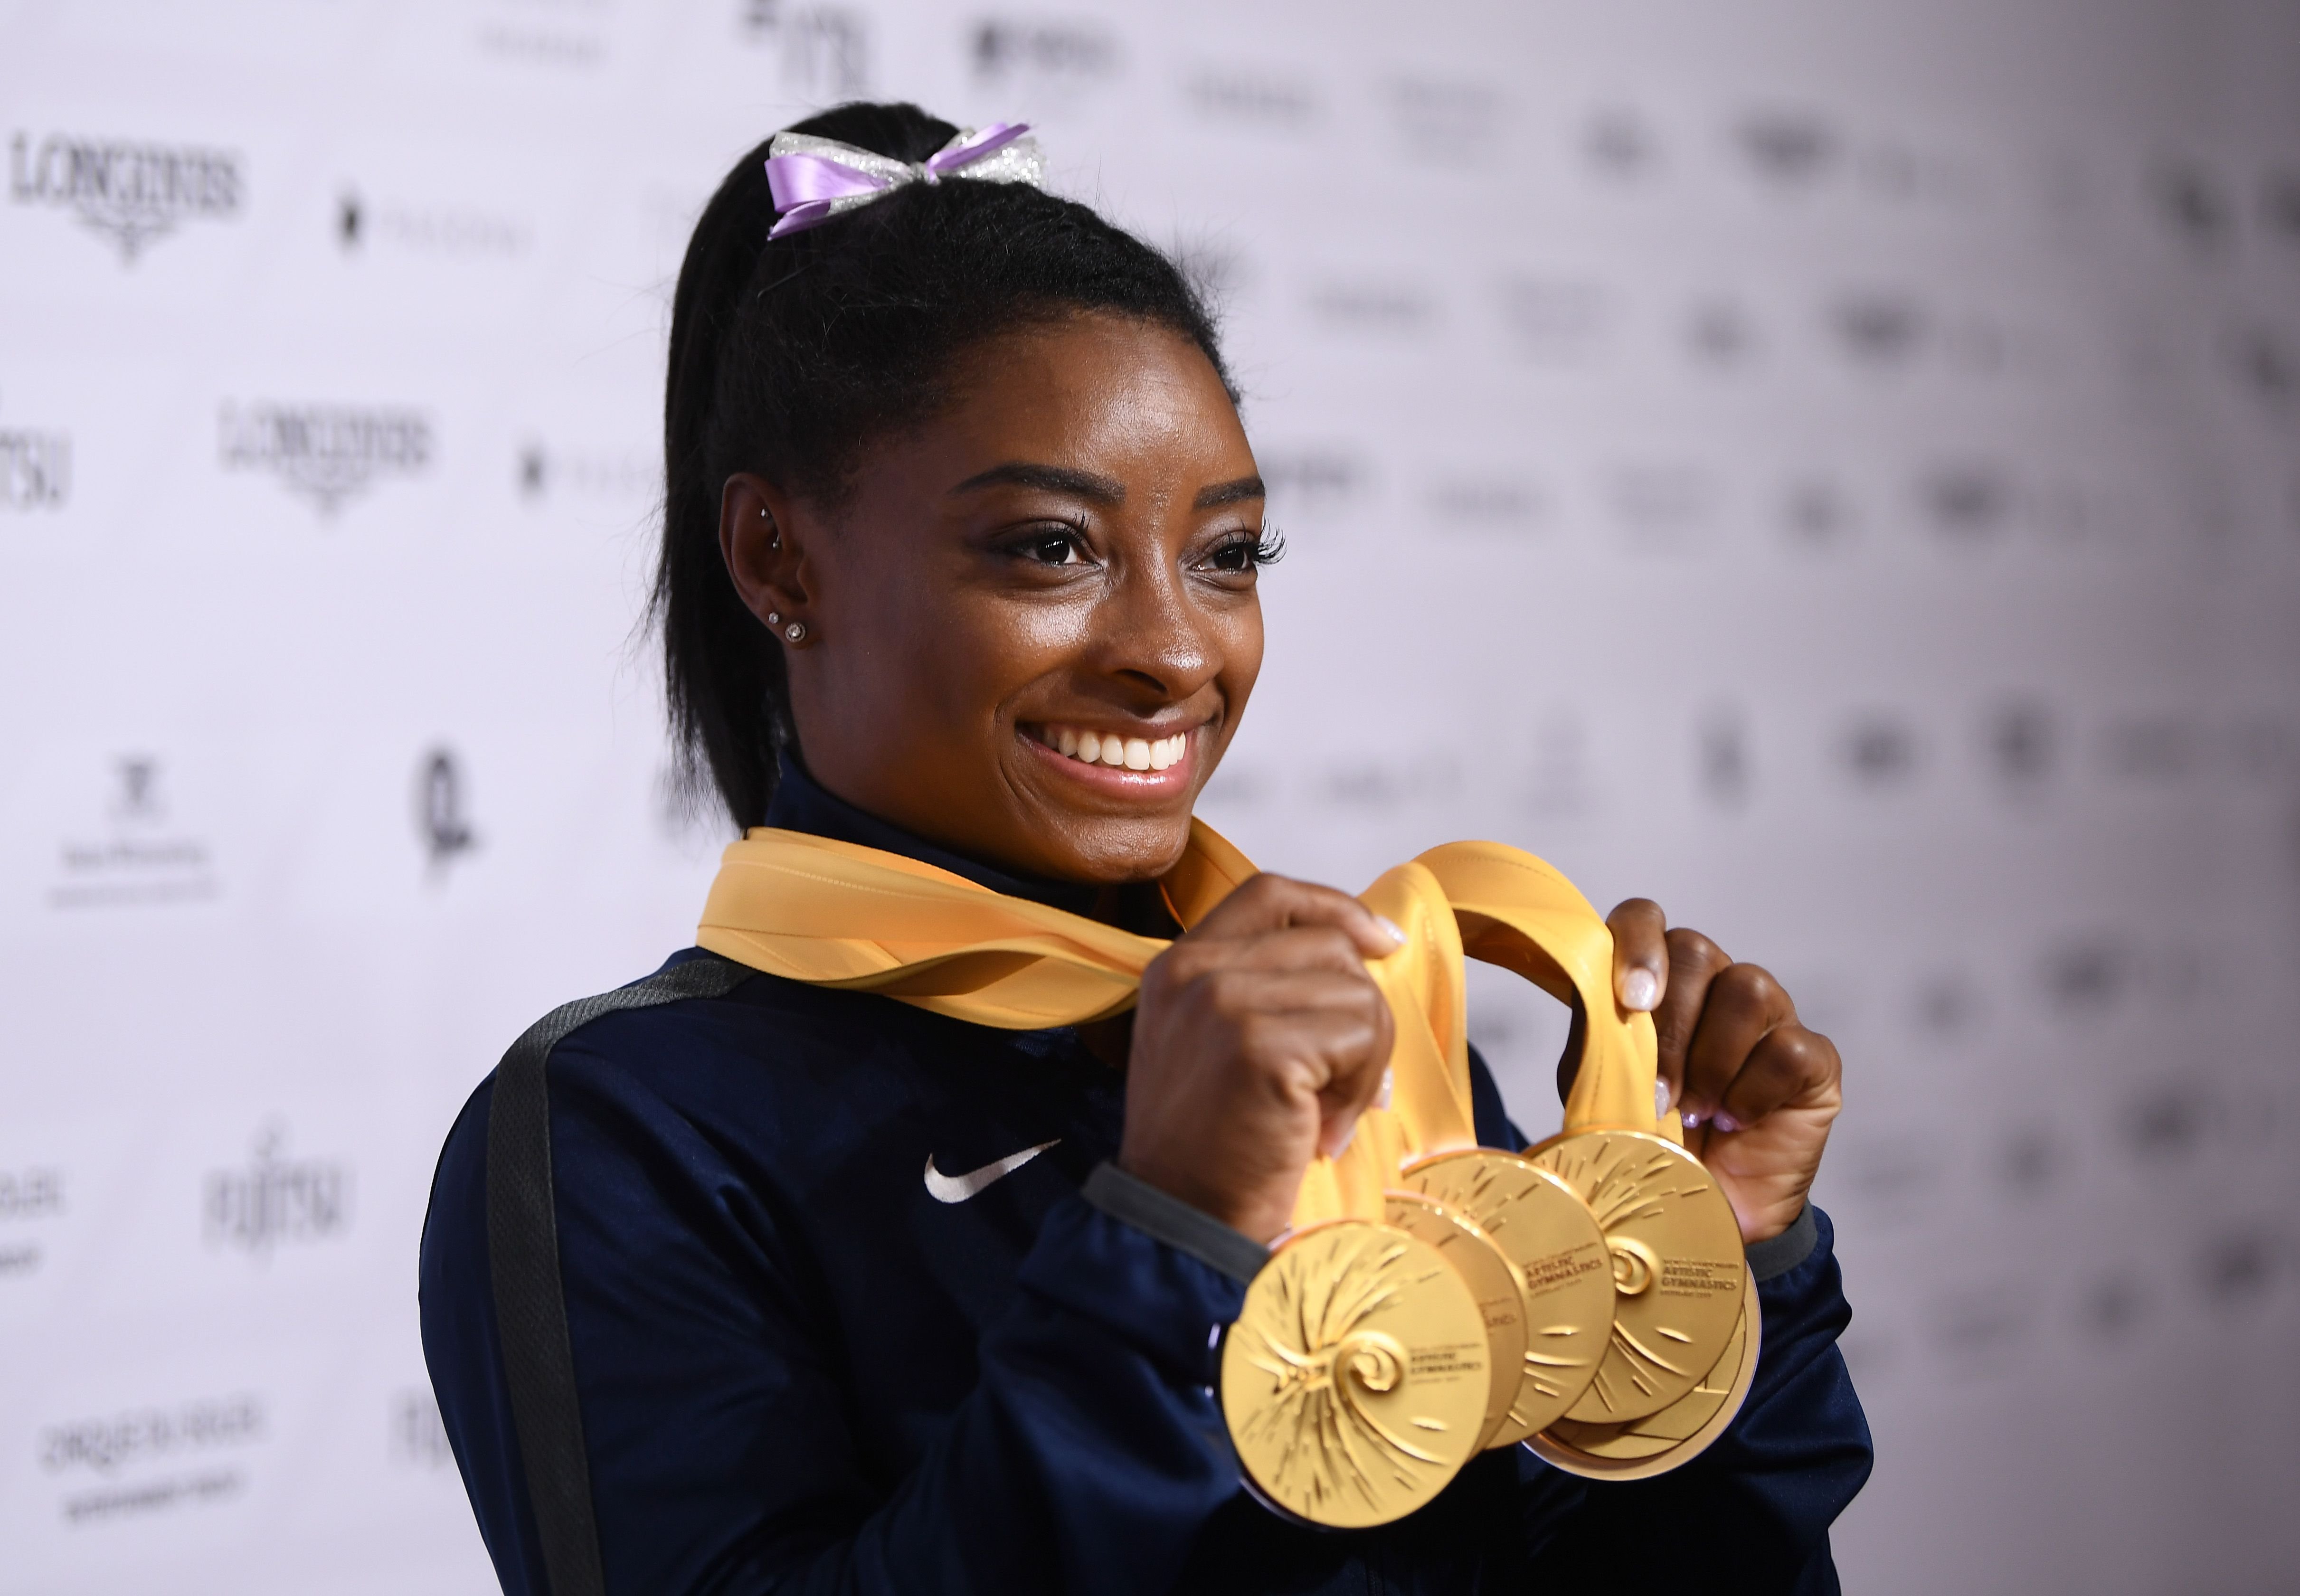 Simone Biles during the FIG Artistic Gymnastics World Championships on October 13, 2019 in Stuttgart, Germany. | Source: Getty Images